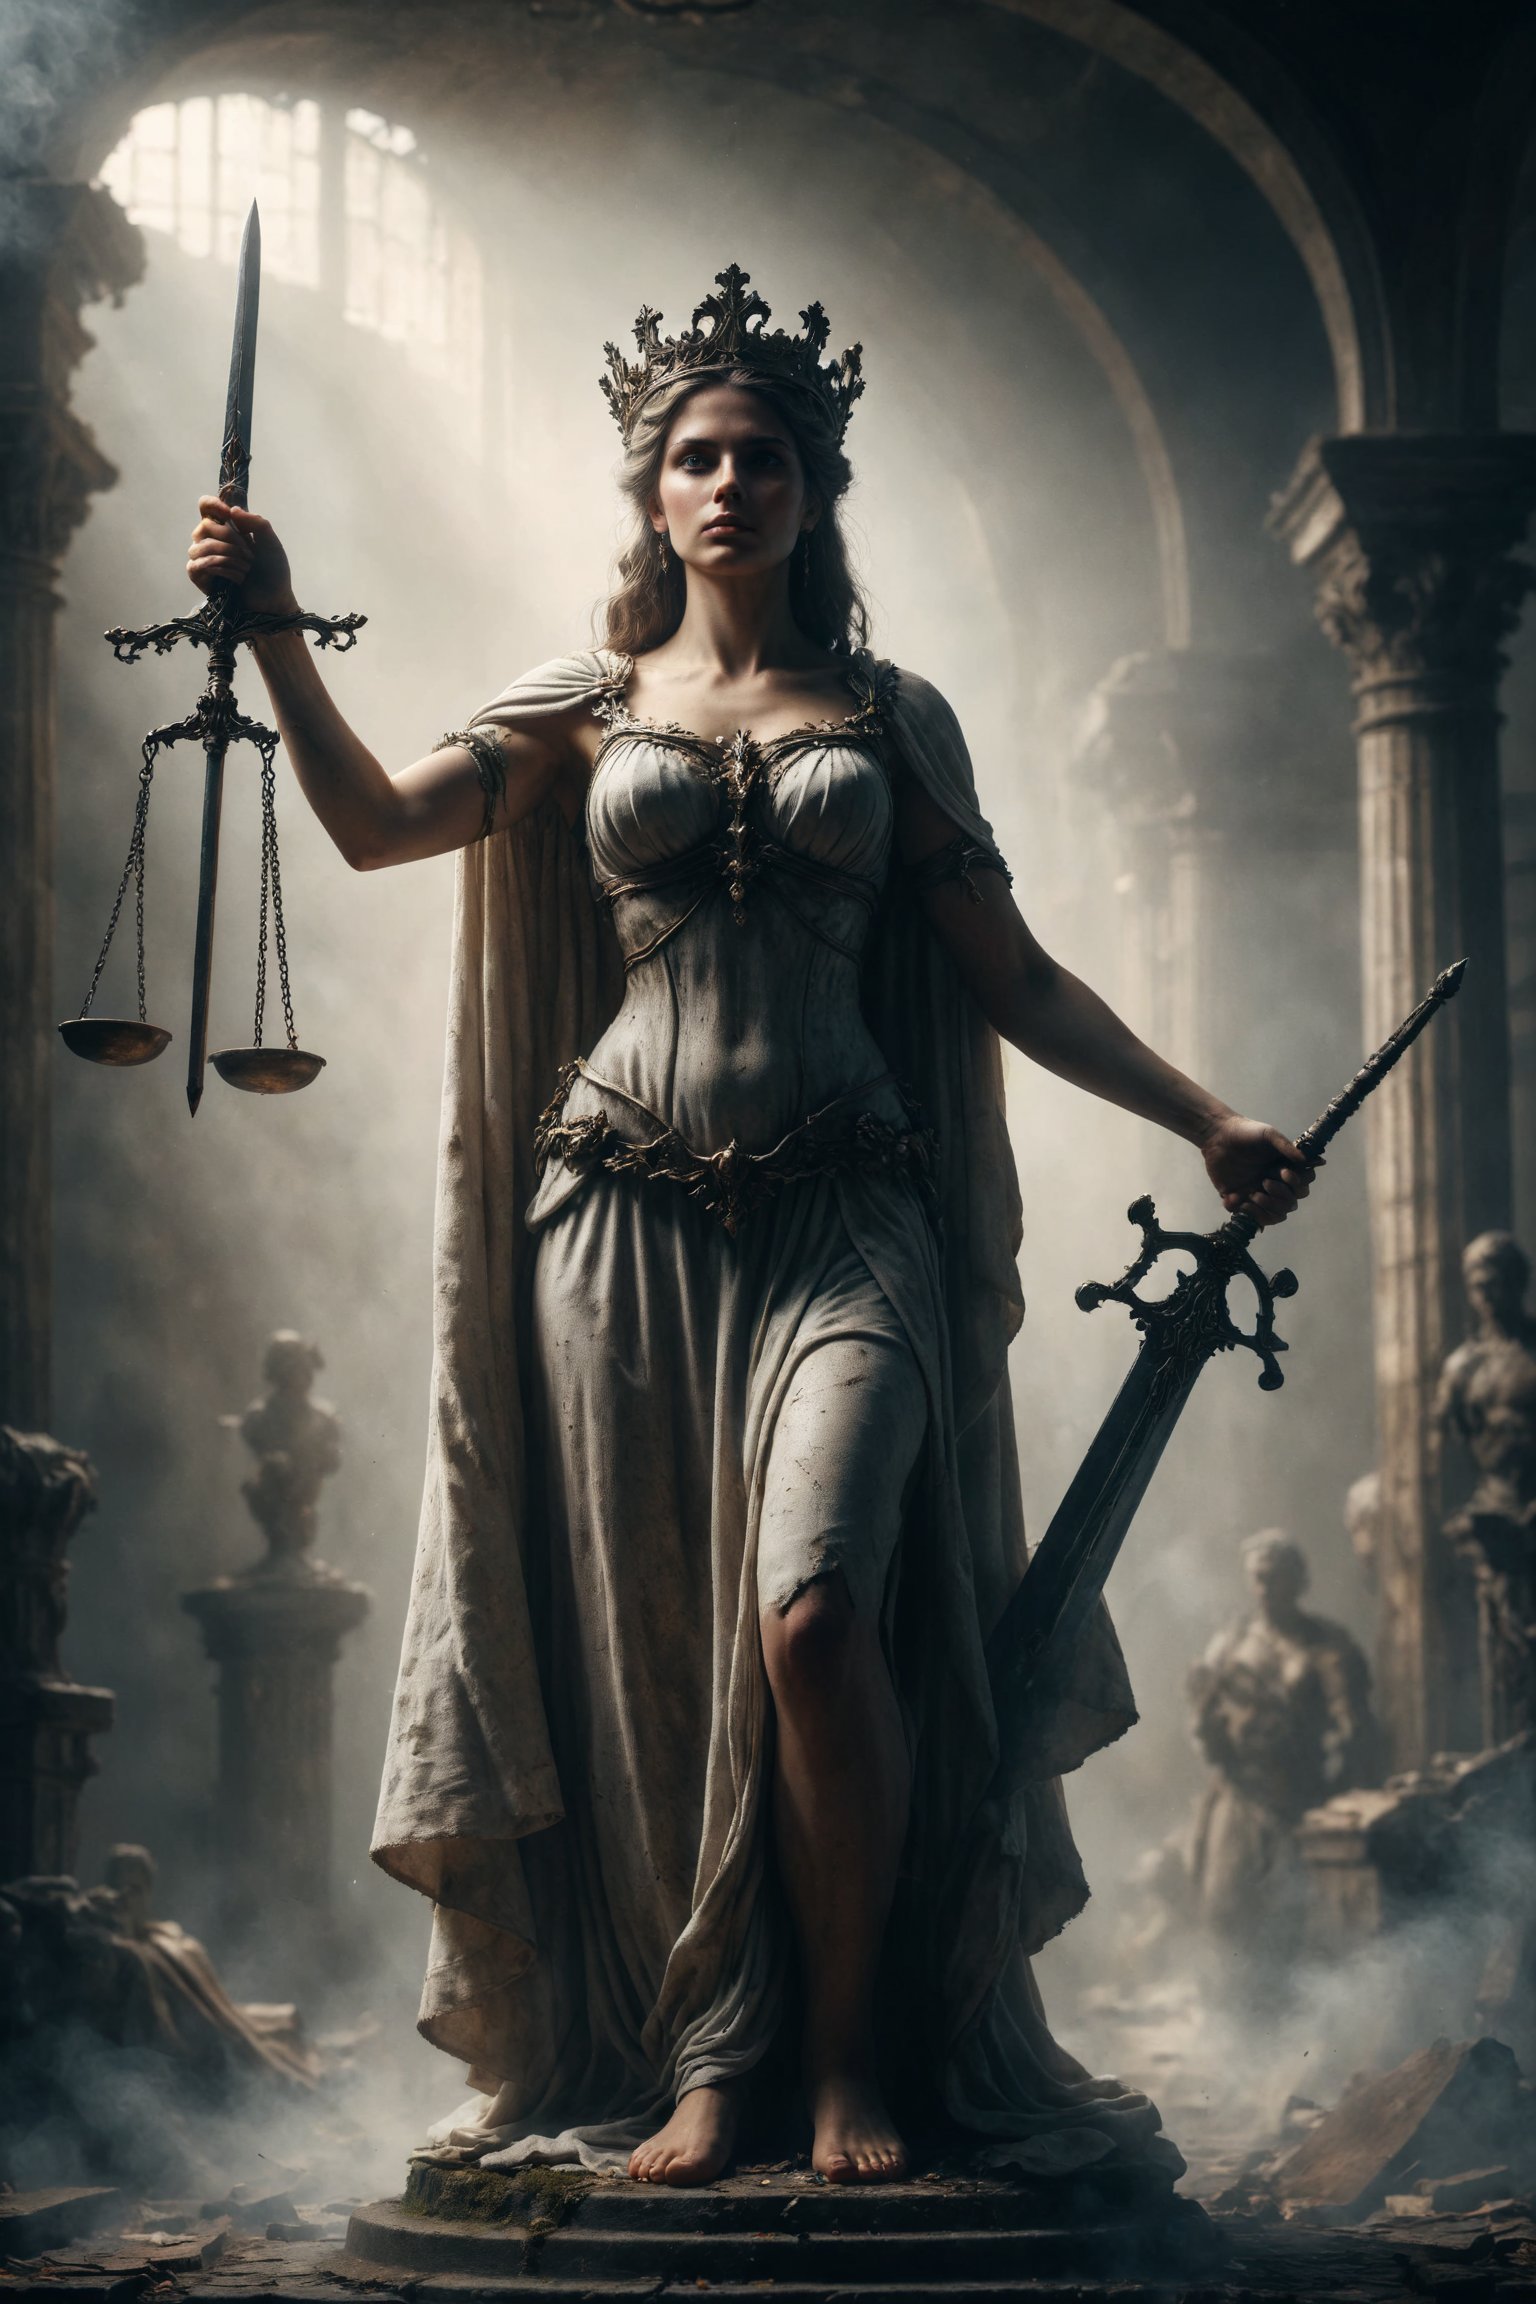 queen of justice full body, Justitia stands with scales in one hand and a sword in the other, her eyes unyielding in their determination for fairness. Her posture radiates authority and impartiality.